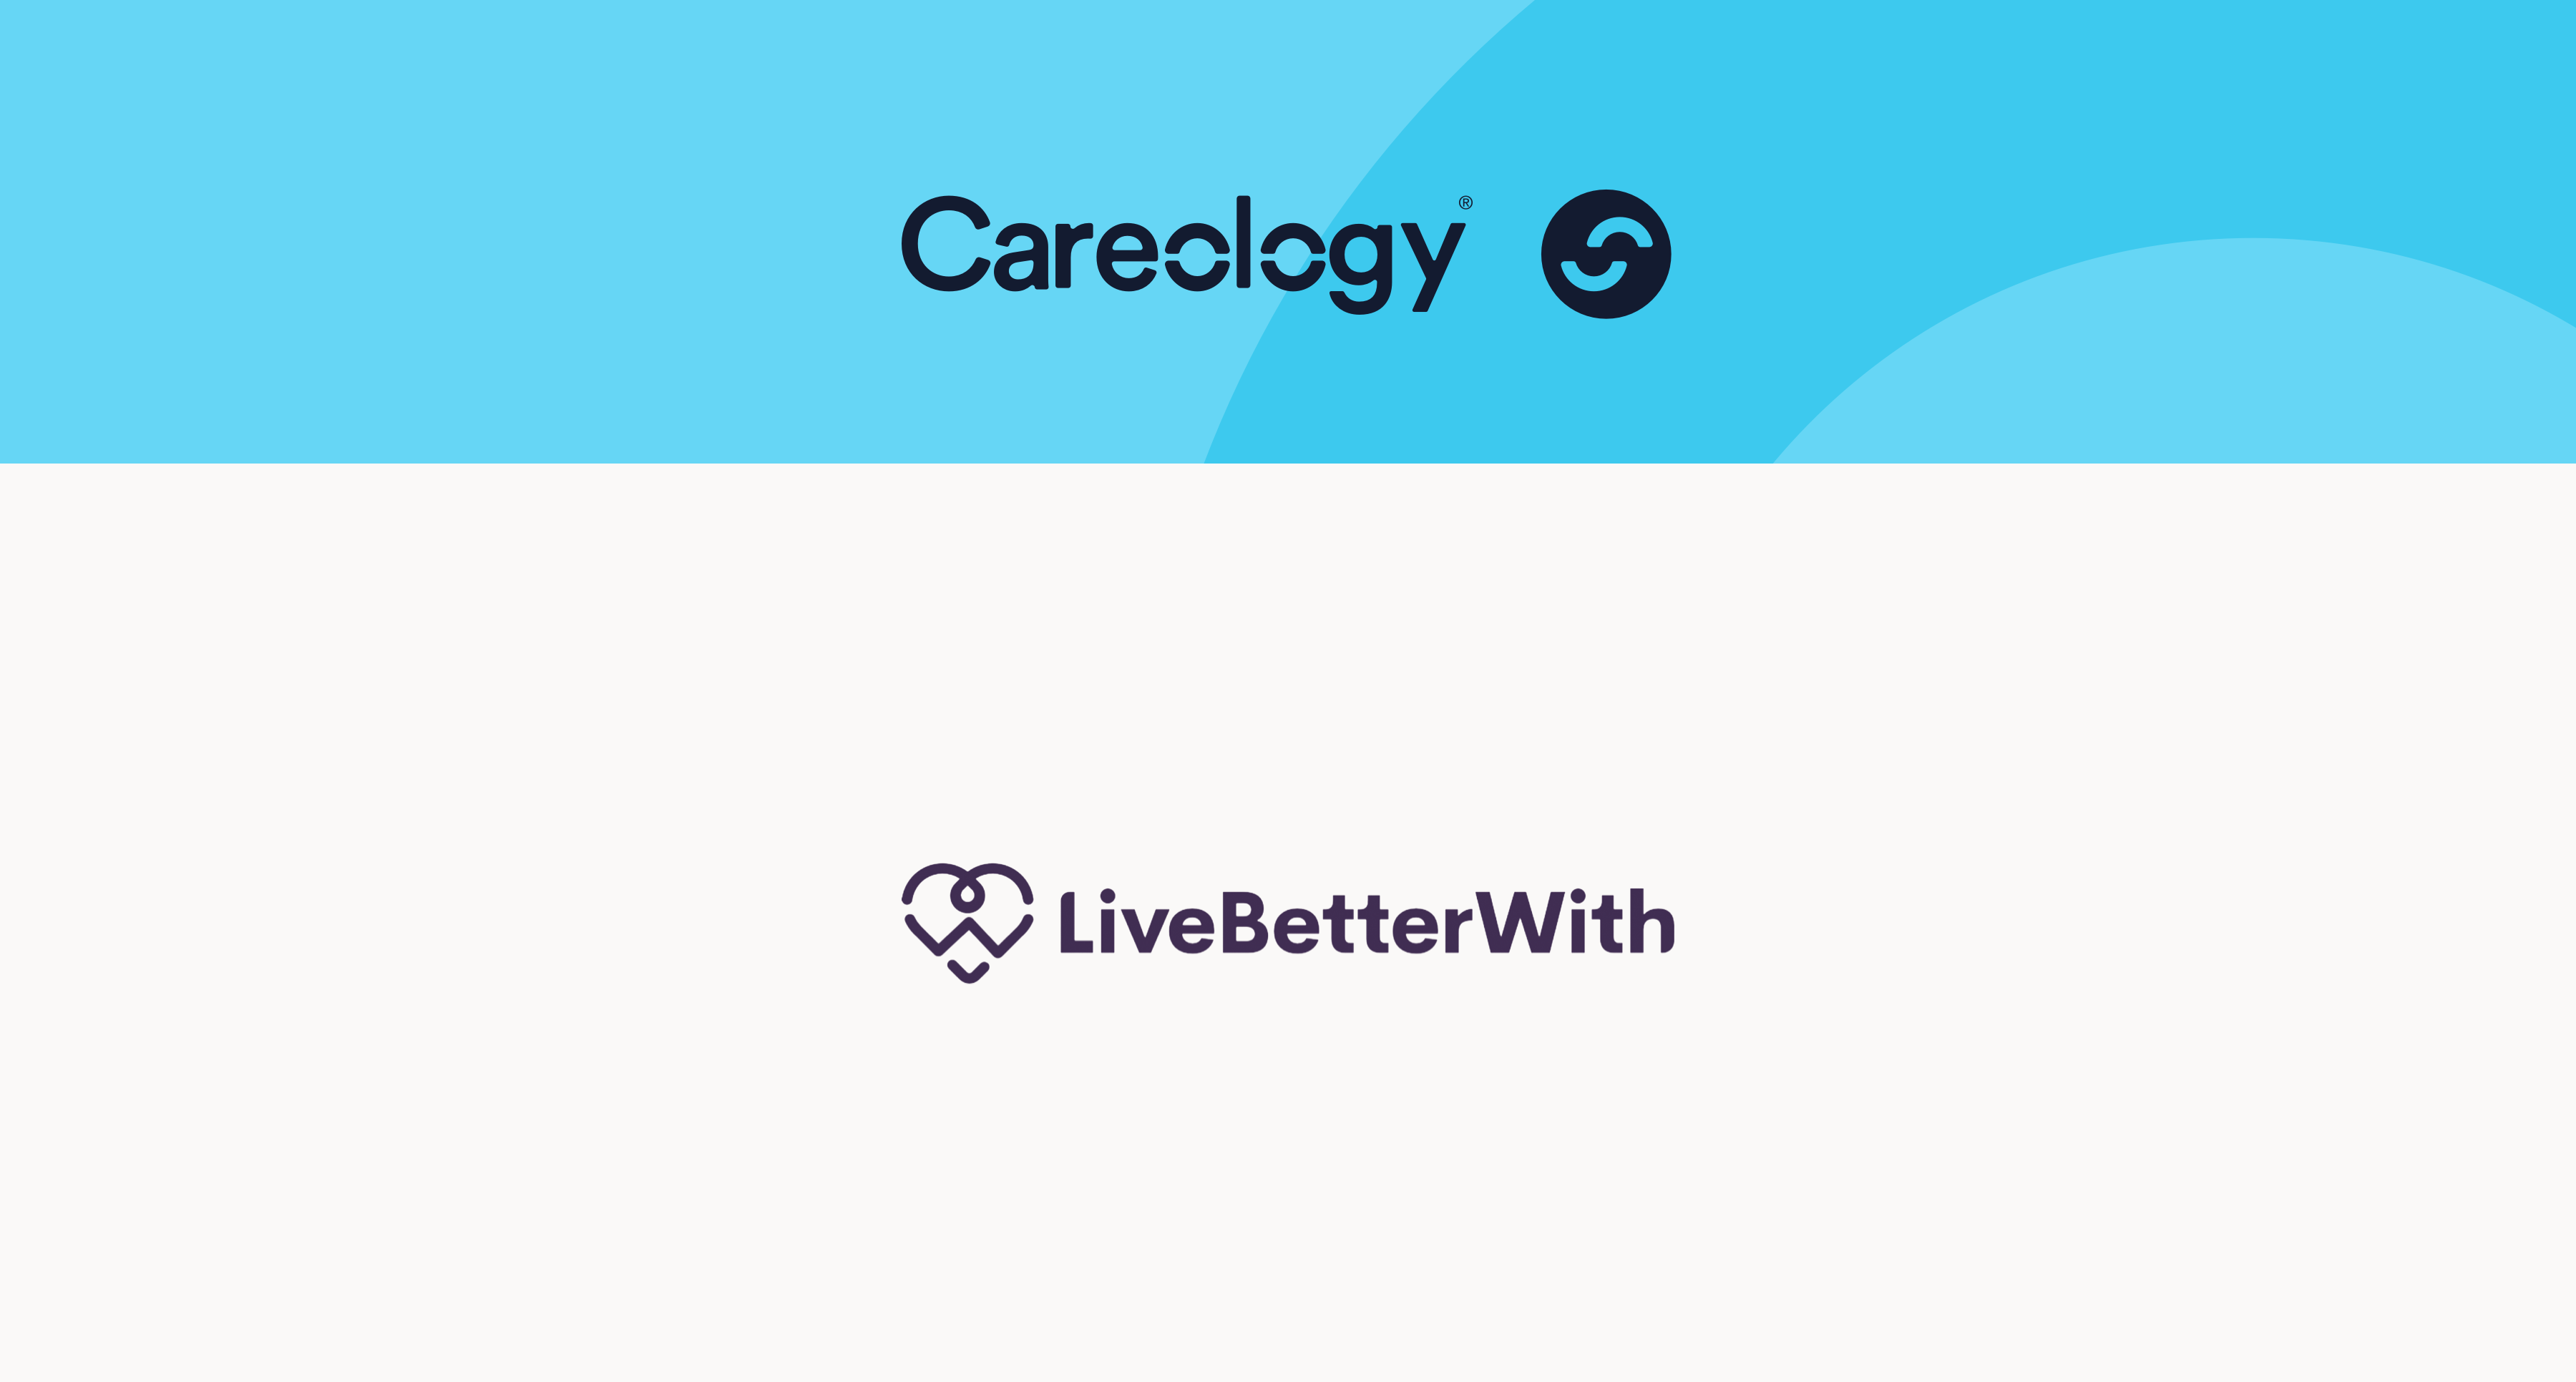 Introducing our partnership with Live Better With